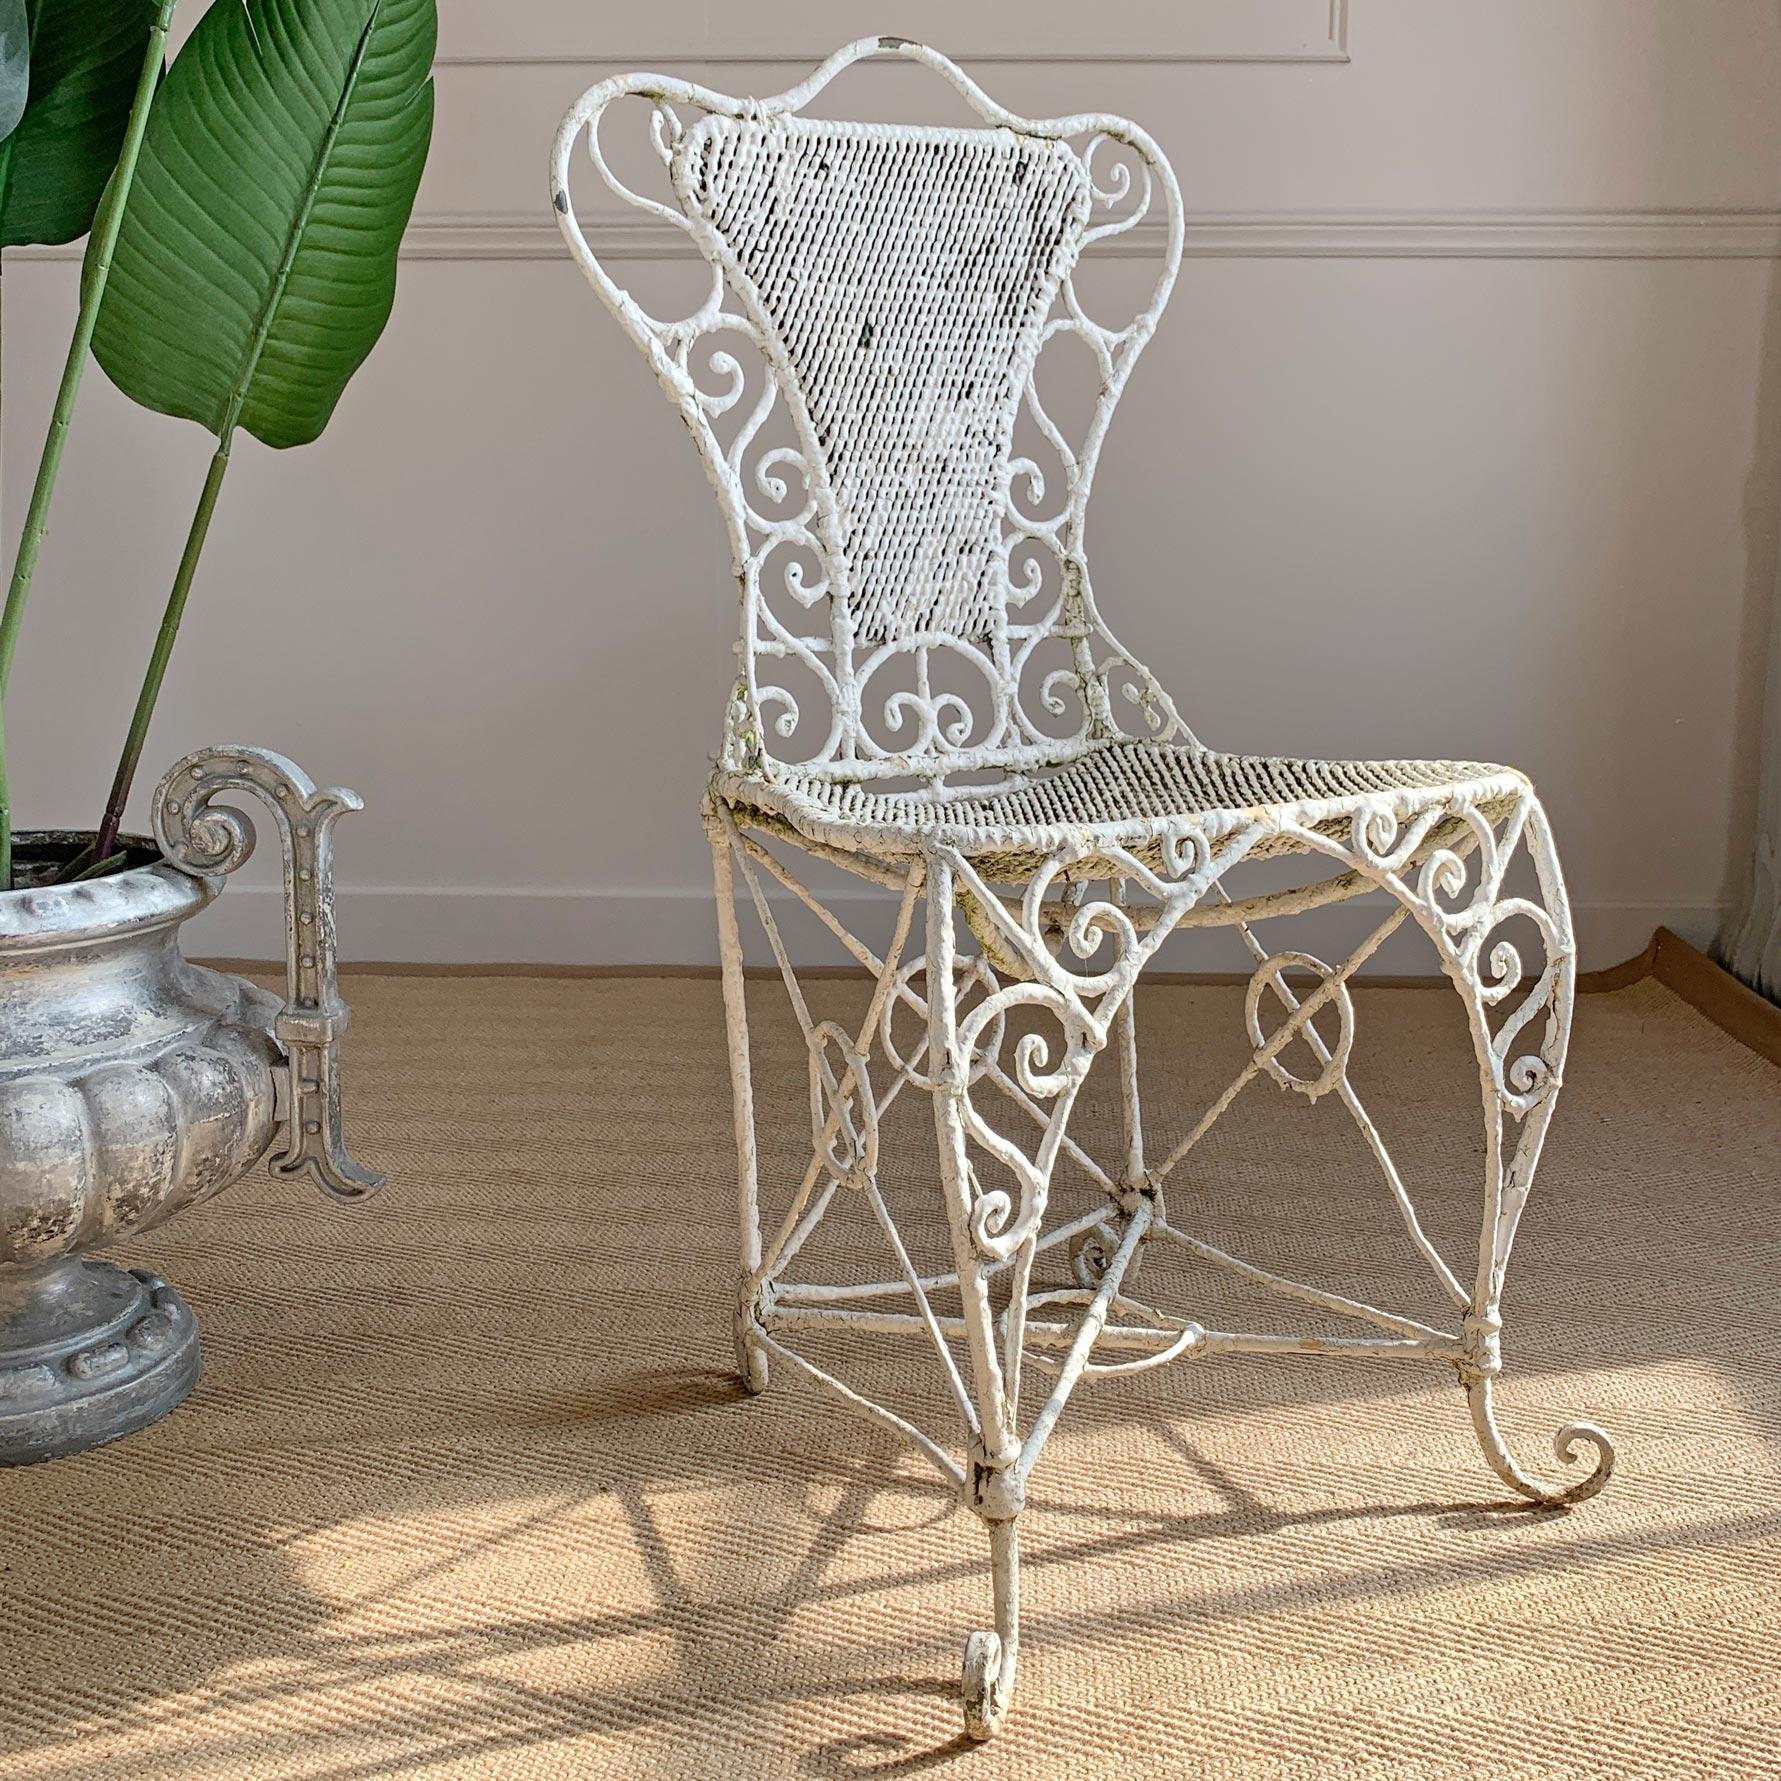 Ornate Regency White Wirework Iron Chair For Sale 2